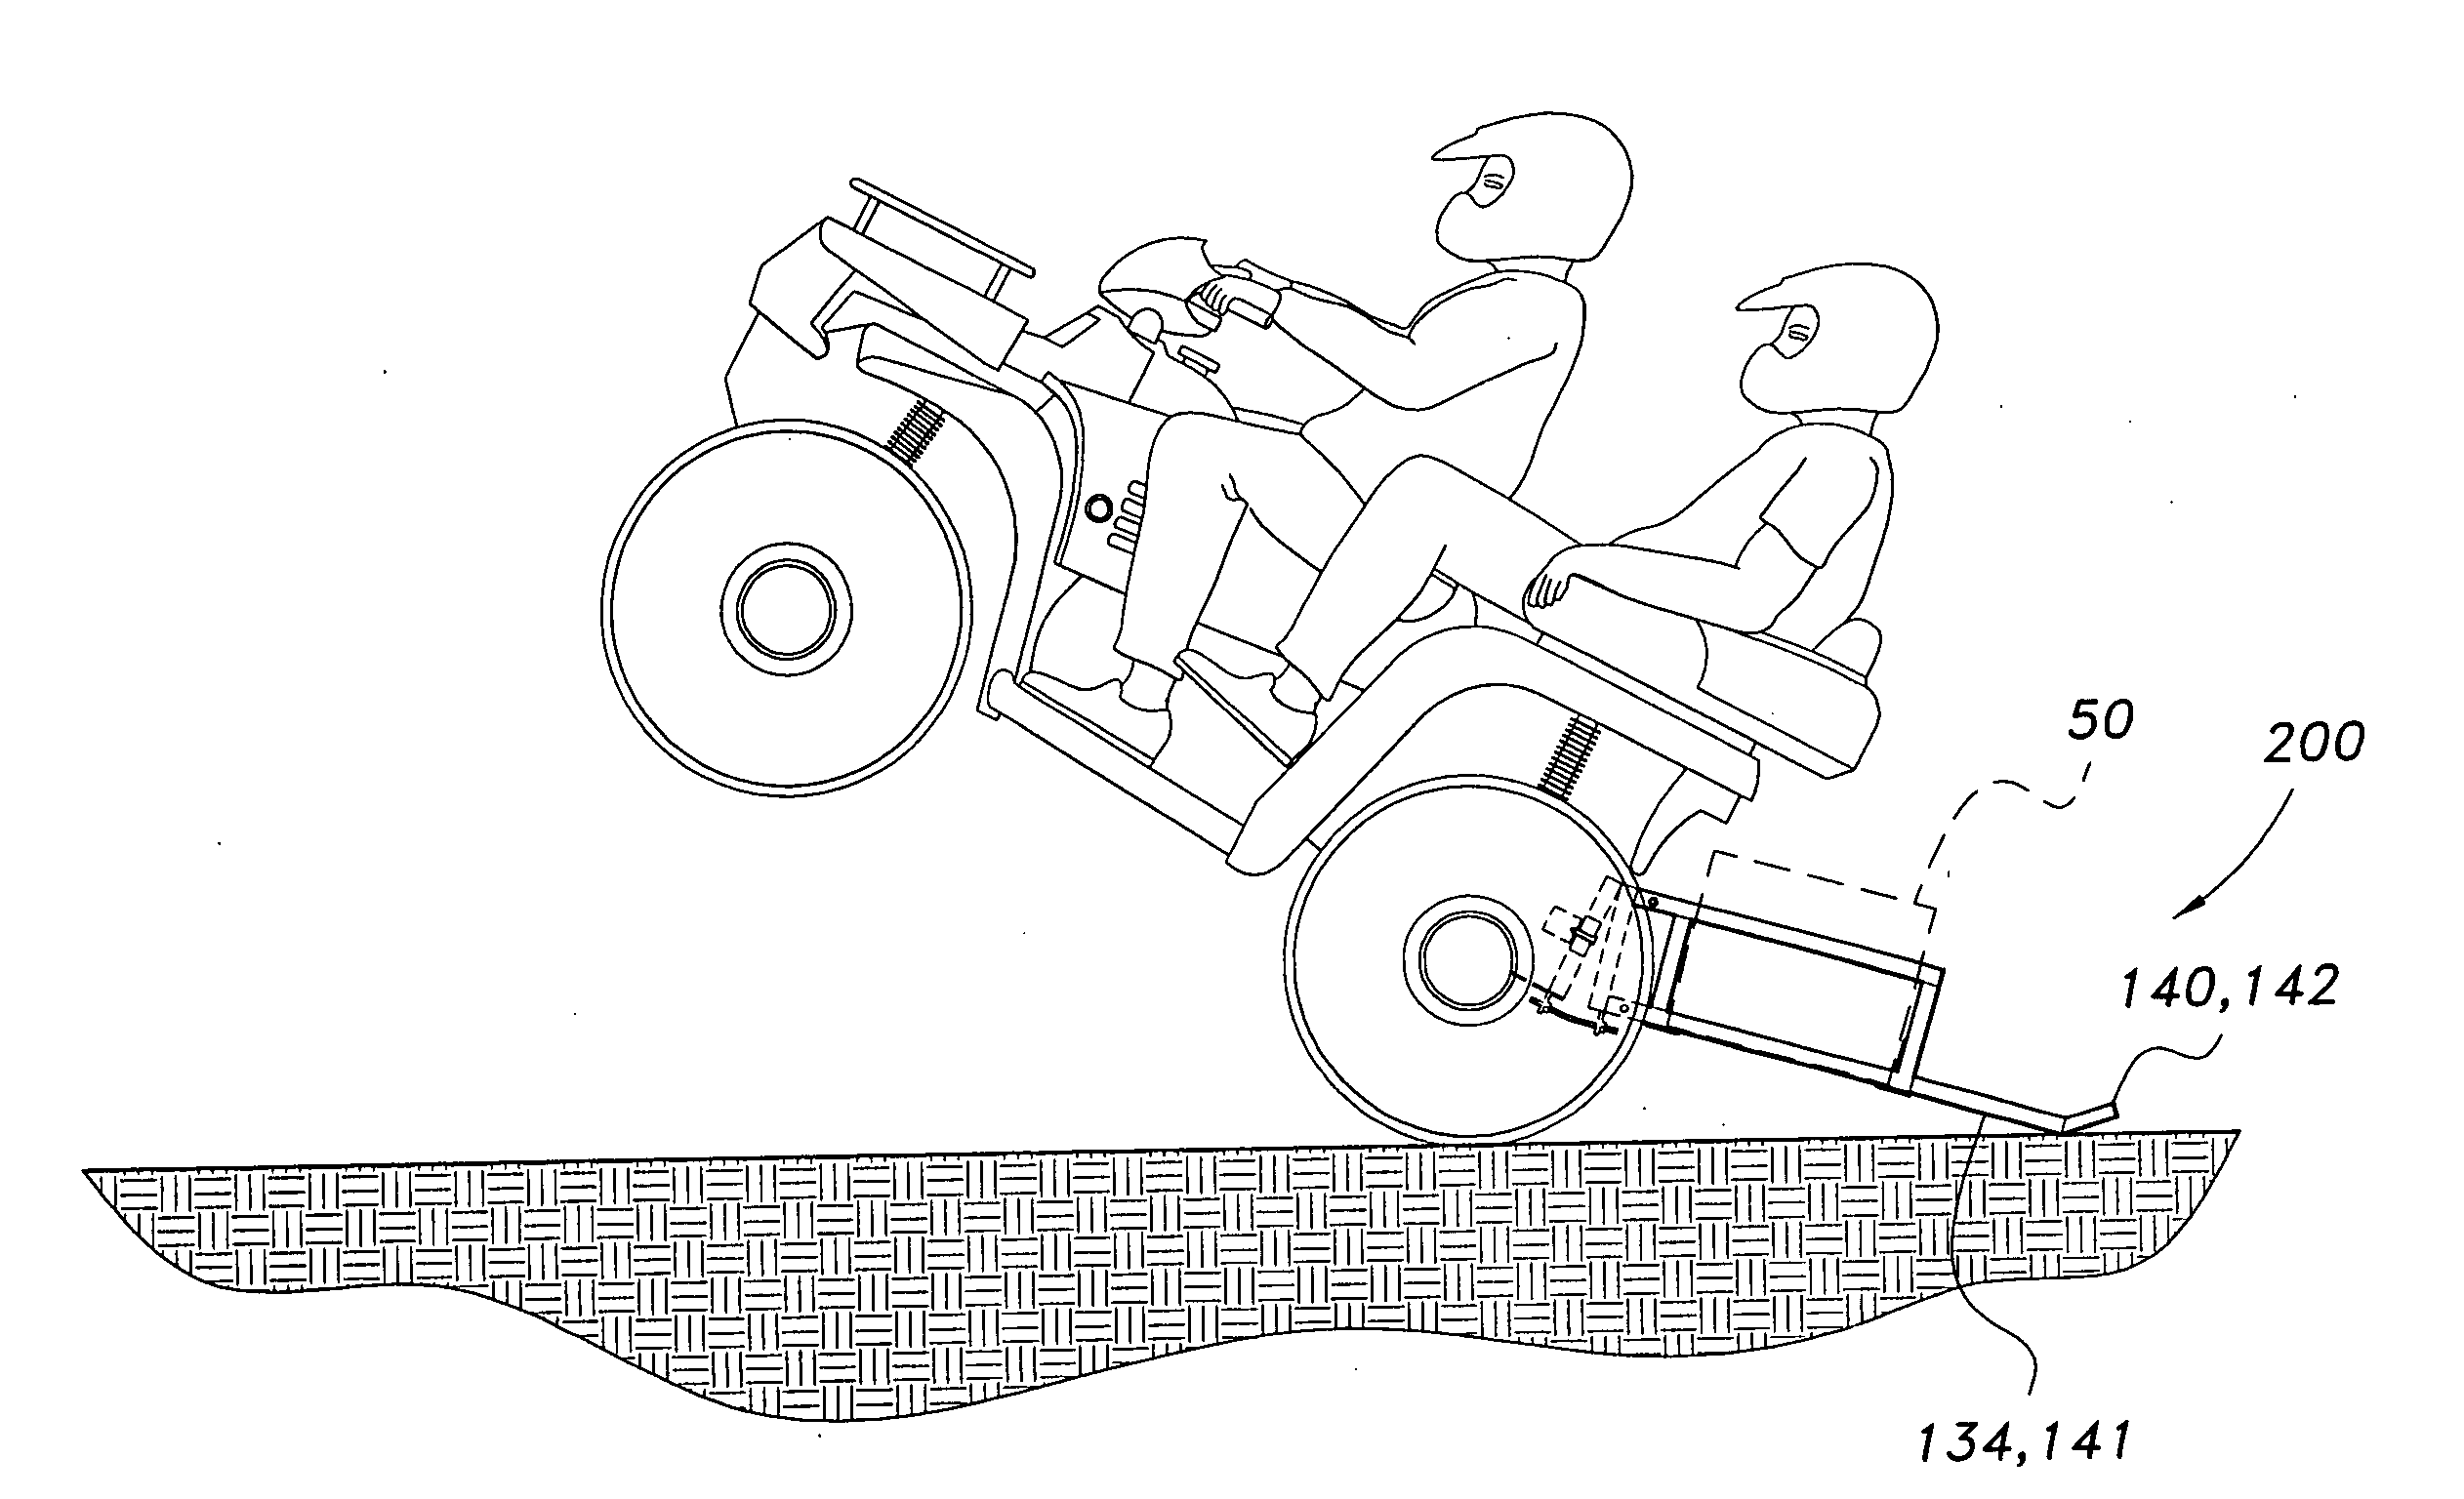 All terrain vehicle safety attachment with gas tank holder